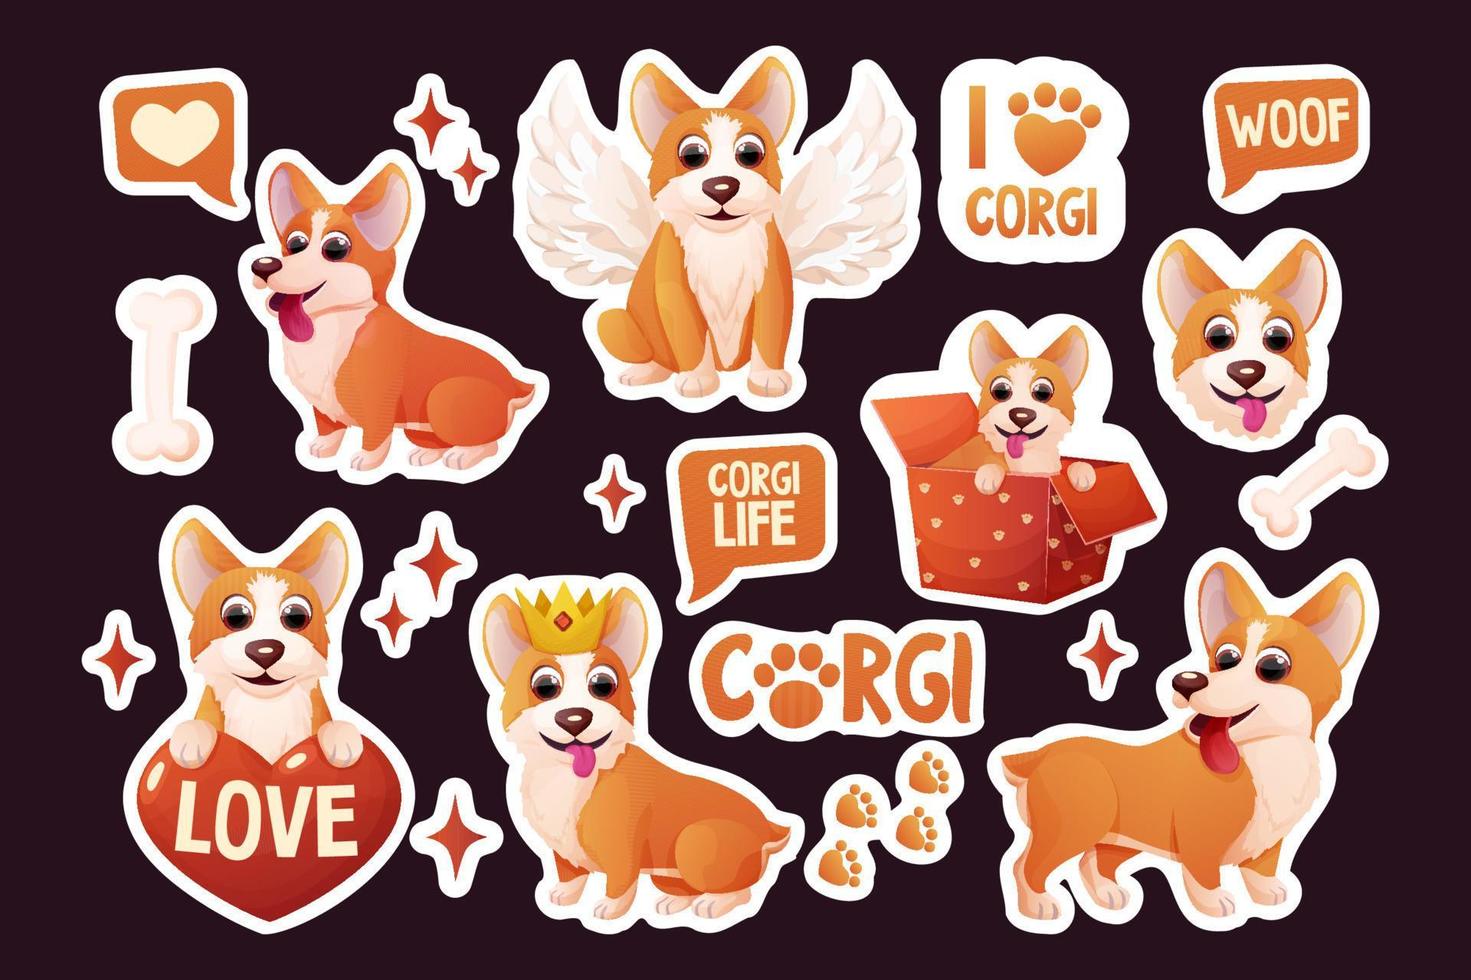 Set corgi dog stickers with crown, wings, sitting, adorable pet, activities in cartoon style isolated on background. Comic emotional character, funny pose. Vector illustration